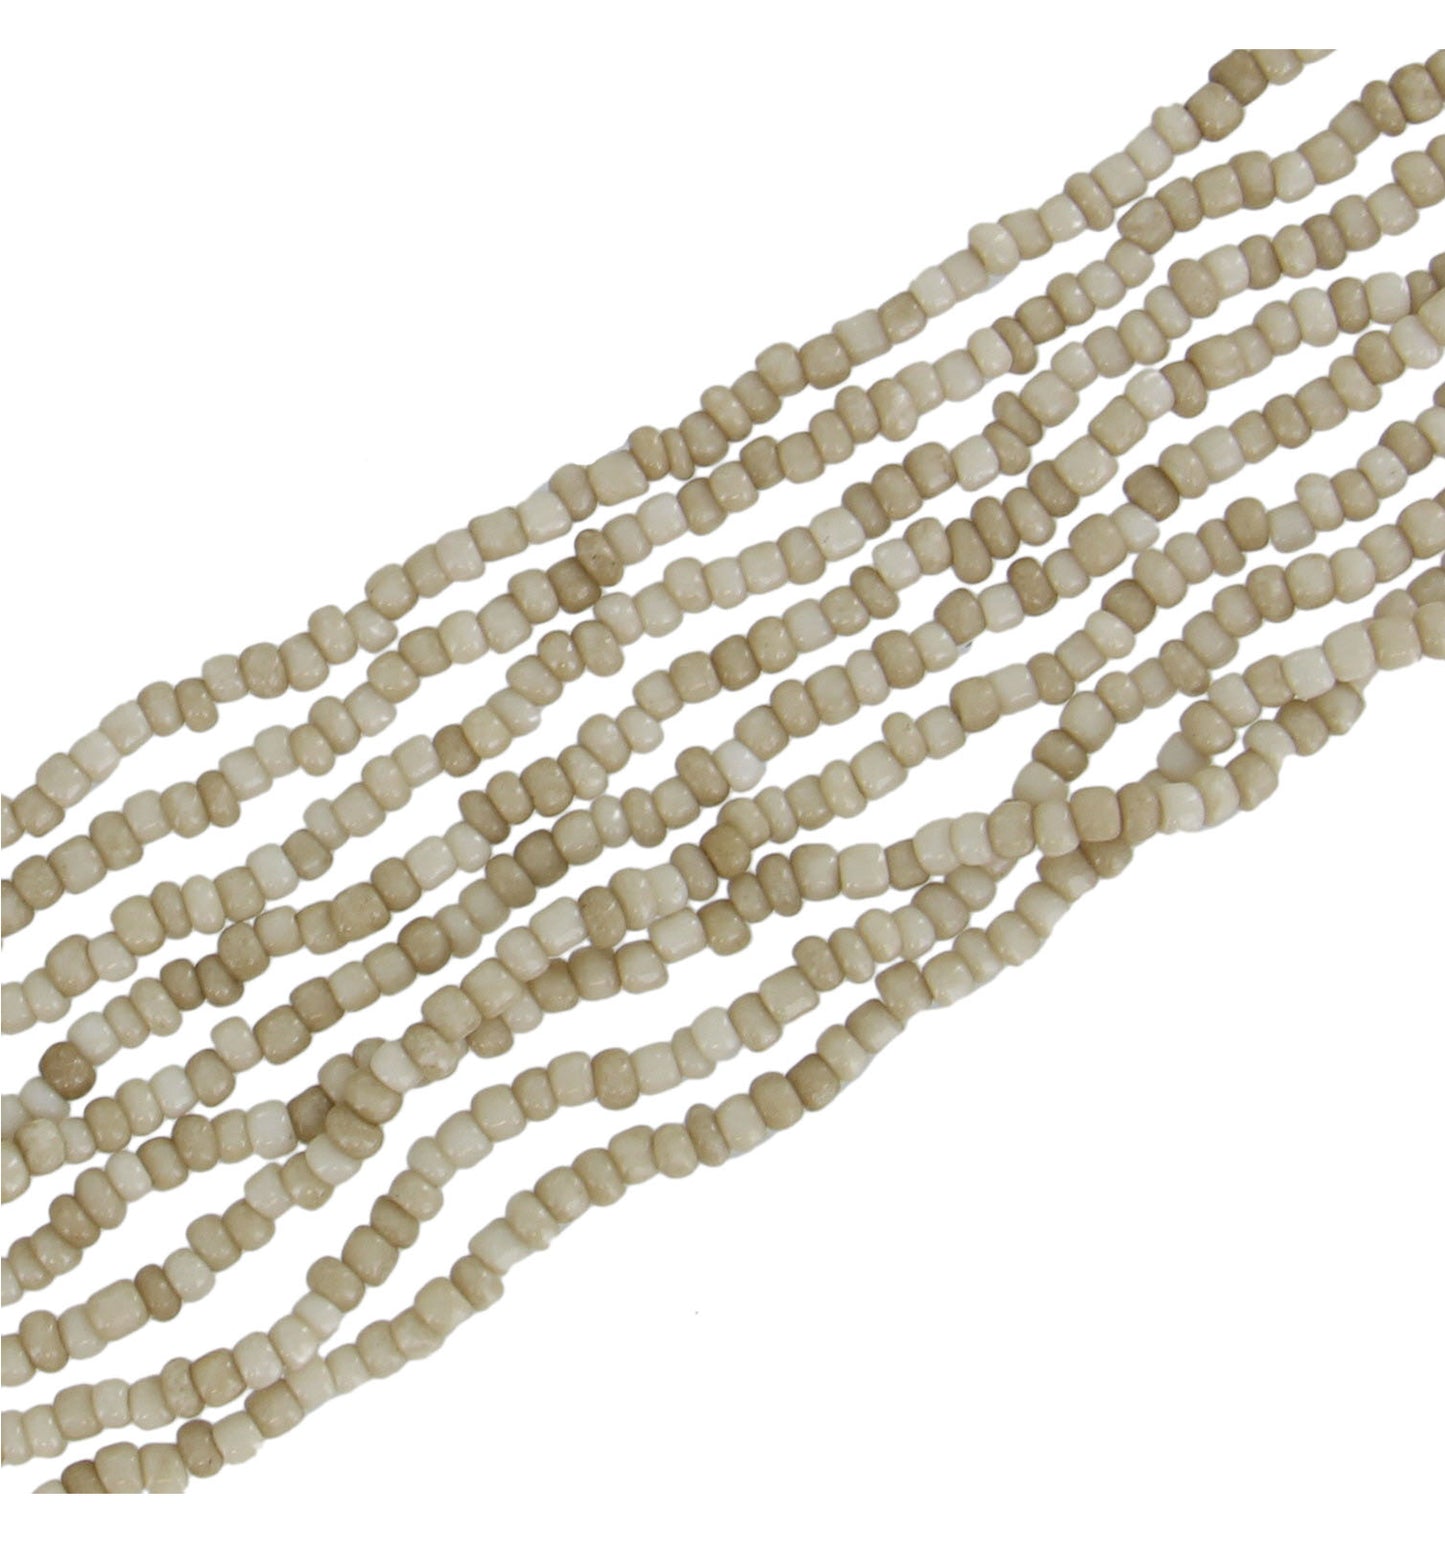 Tan Natural Beige Cream Glass Beaded Multi Strand Layered Necklace 24"